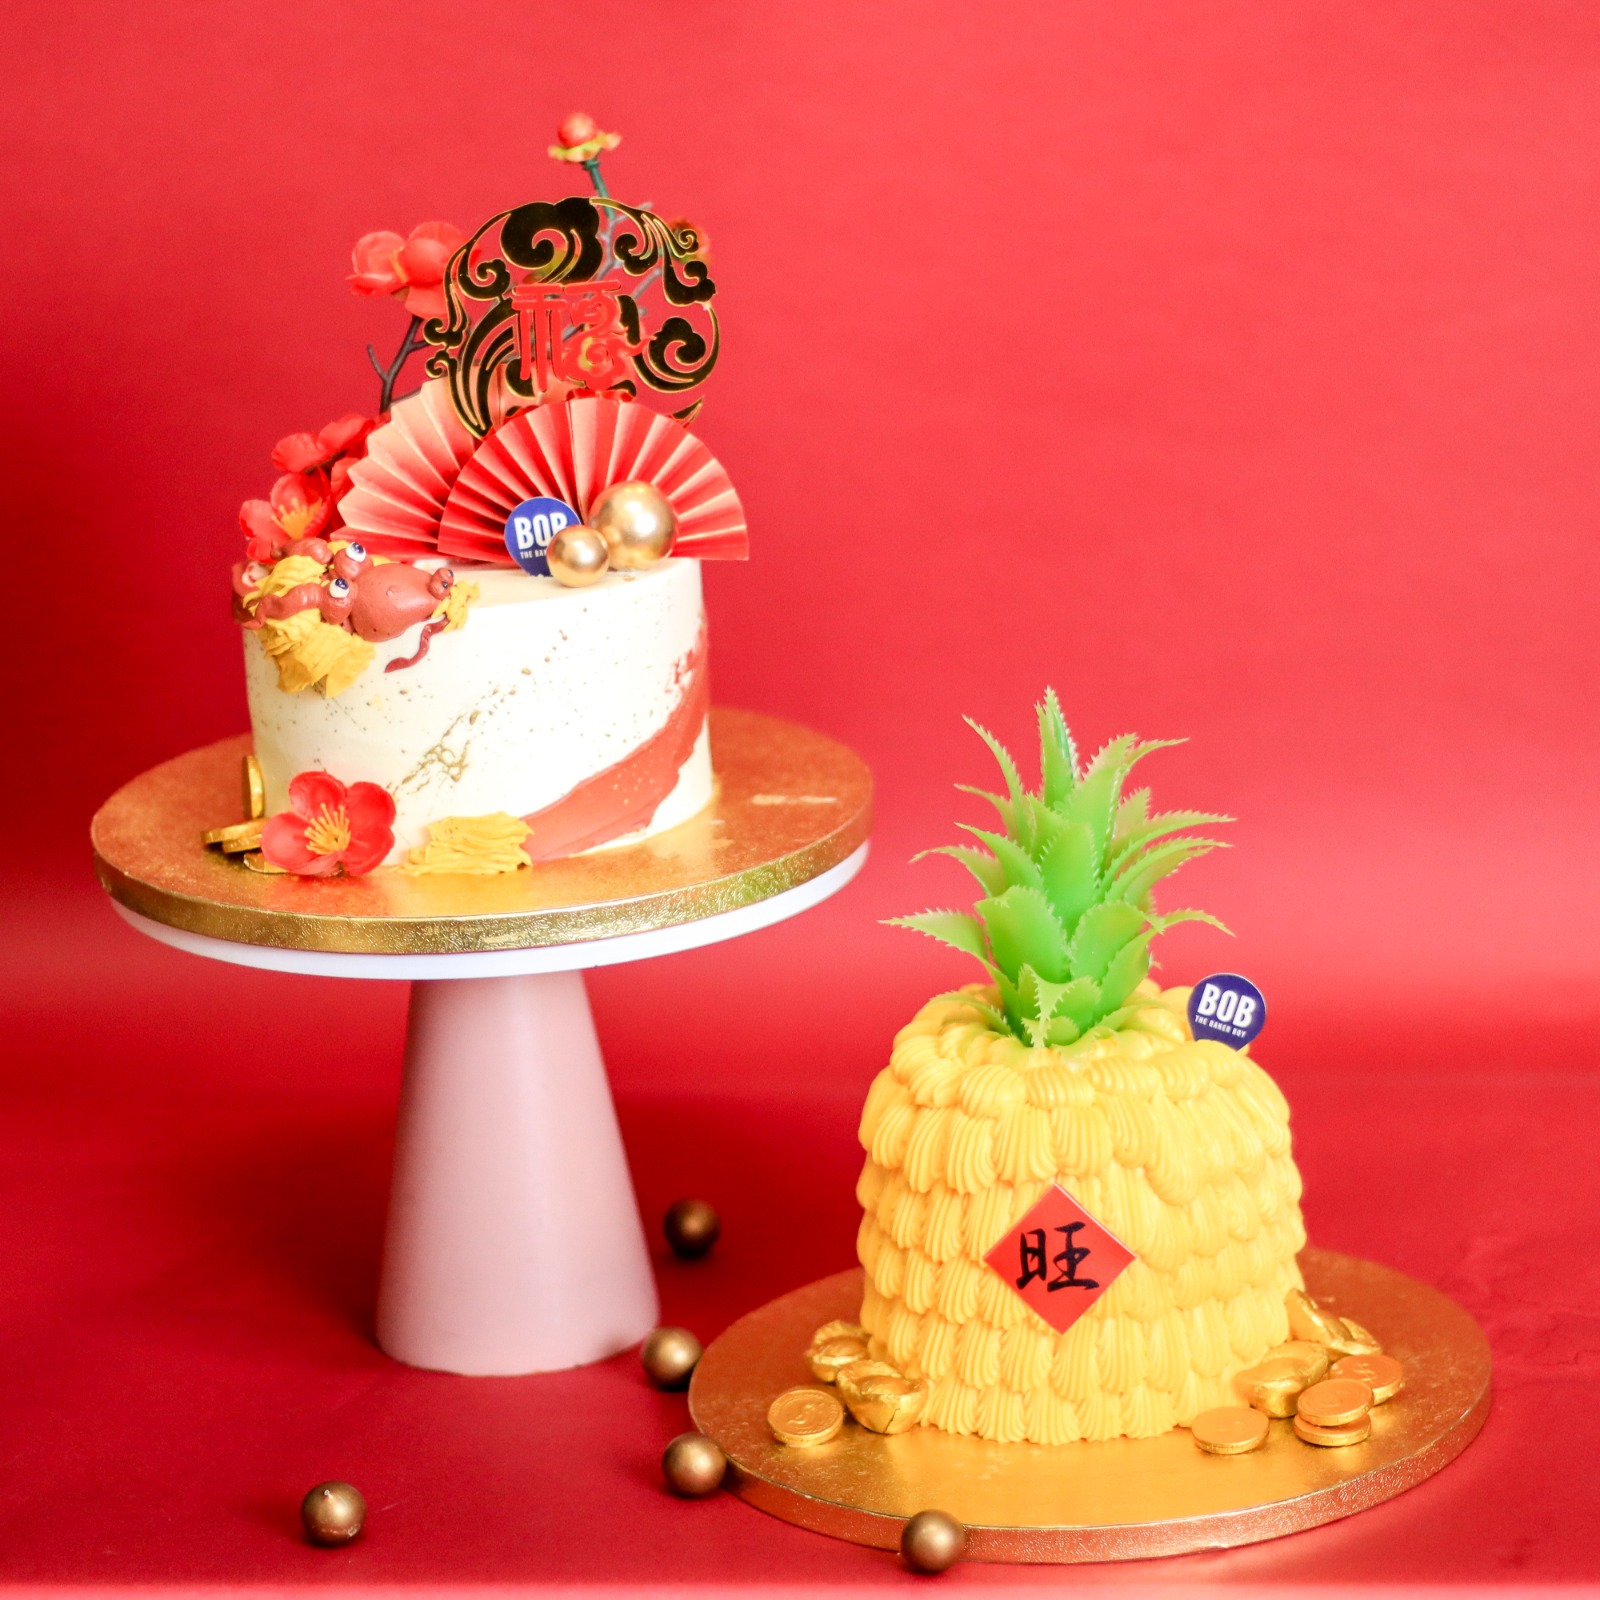 Bundle 1: 3D Pineapple Brownie and Year of the Dragon Cake Bundle